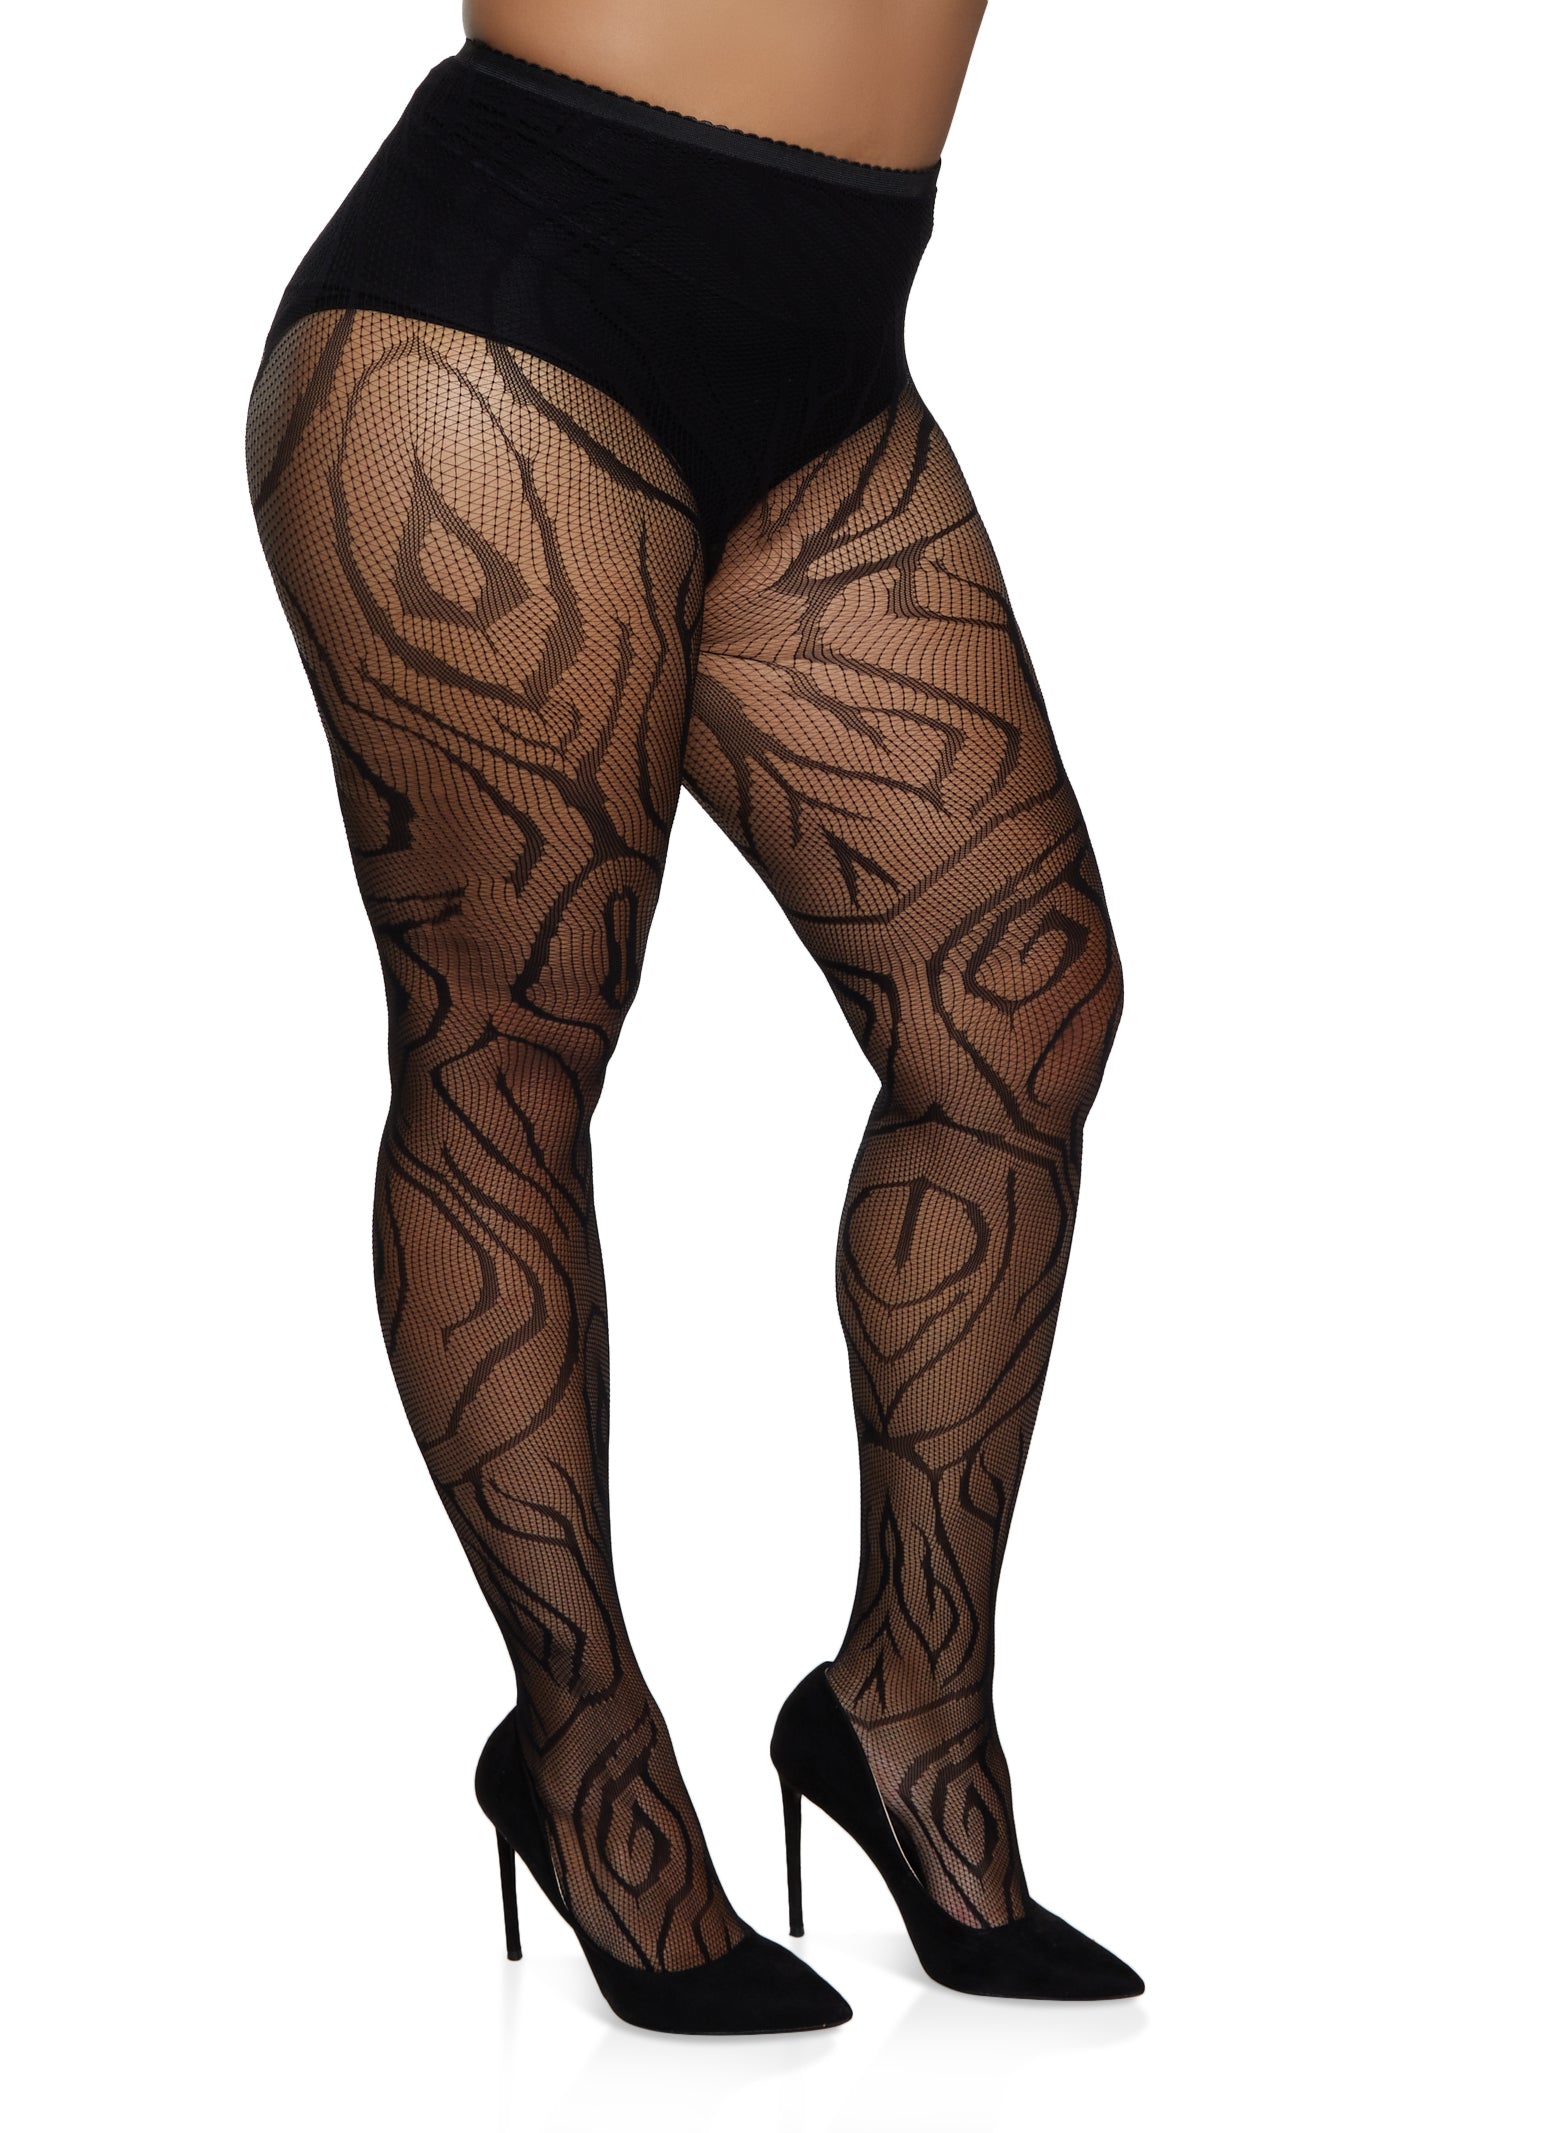 Plus Size Patterned Tights - Stone